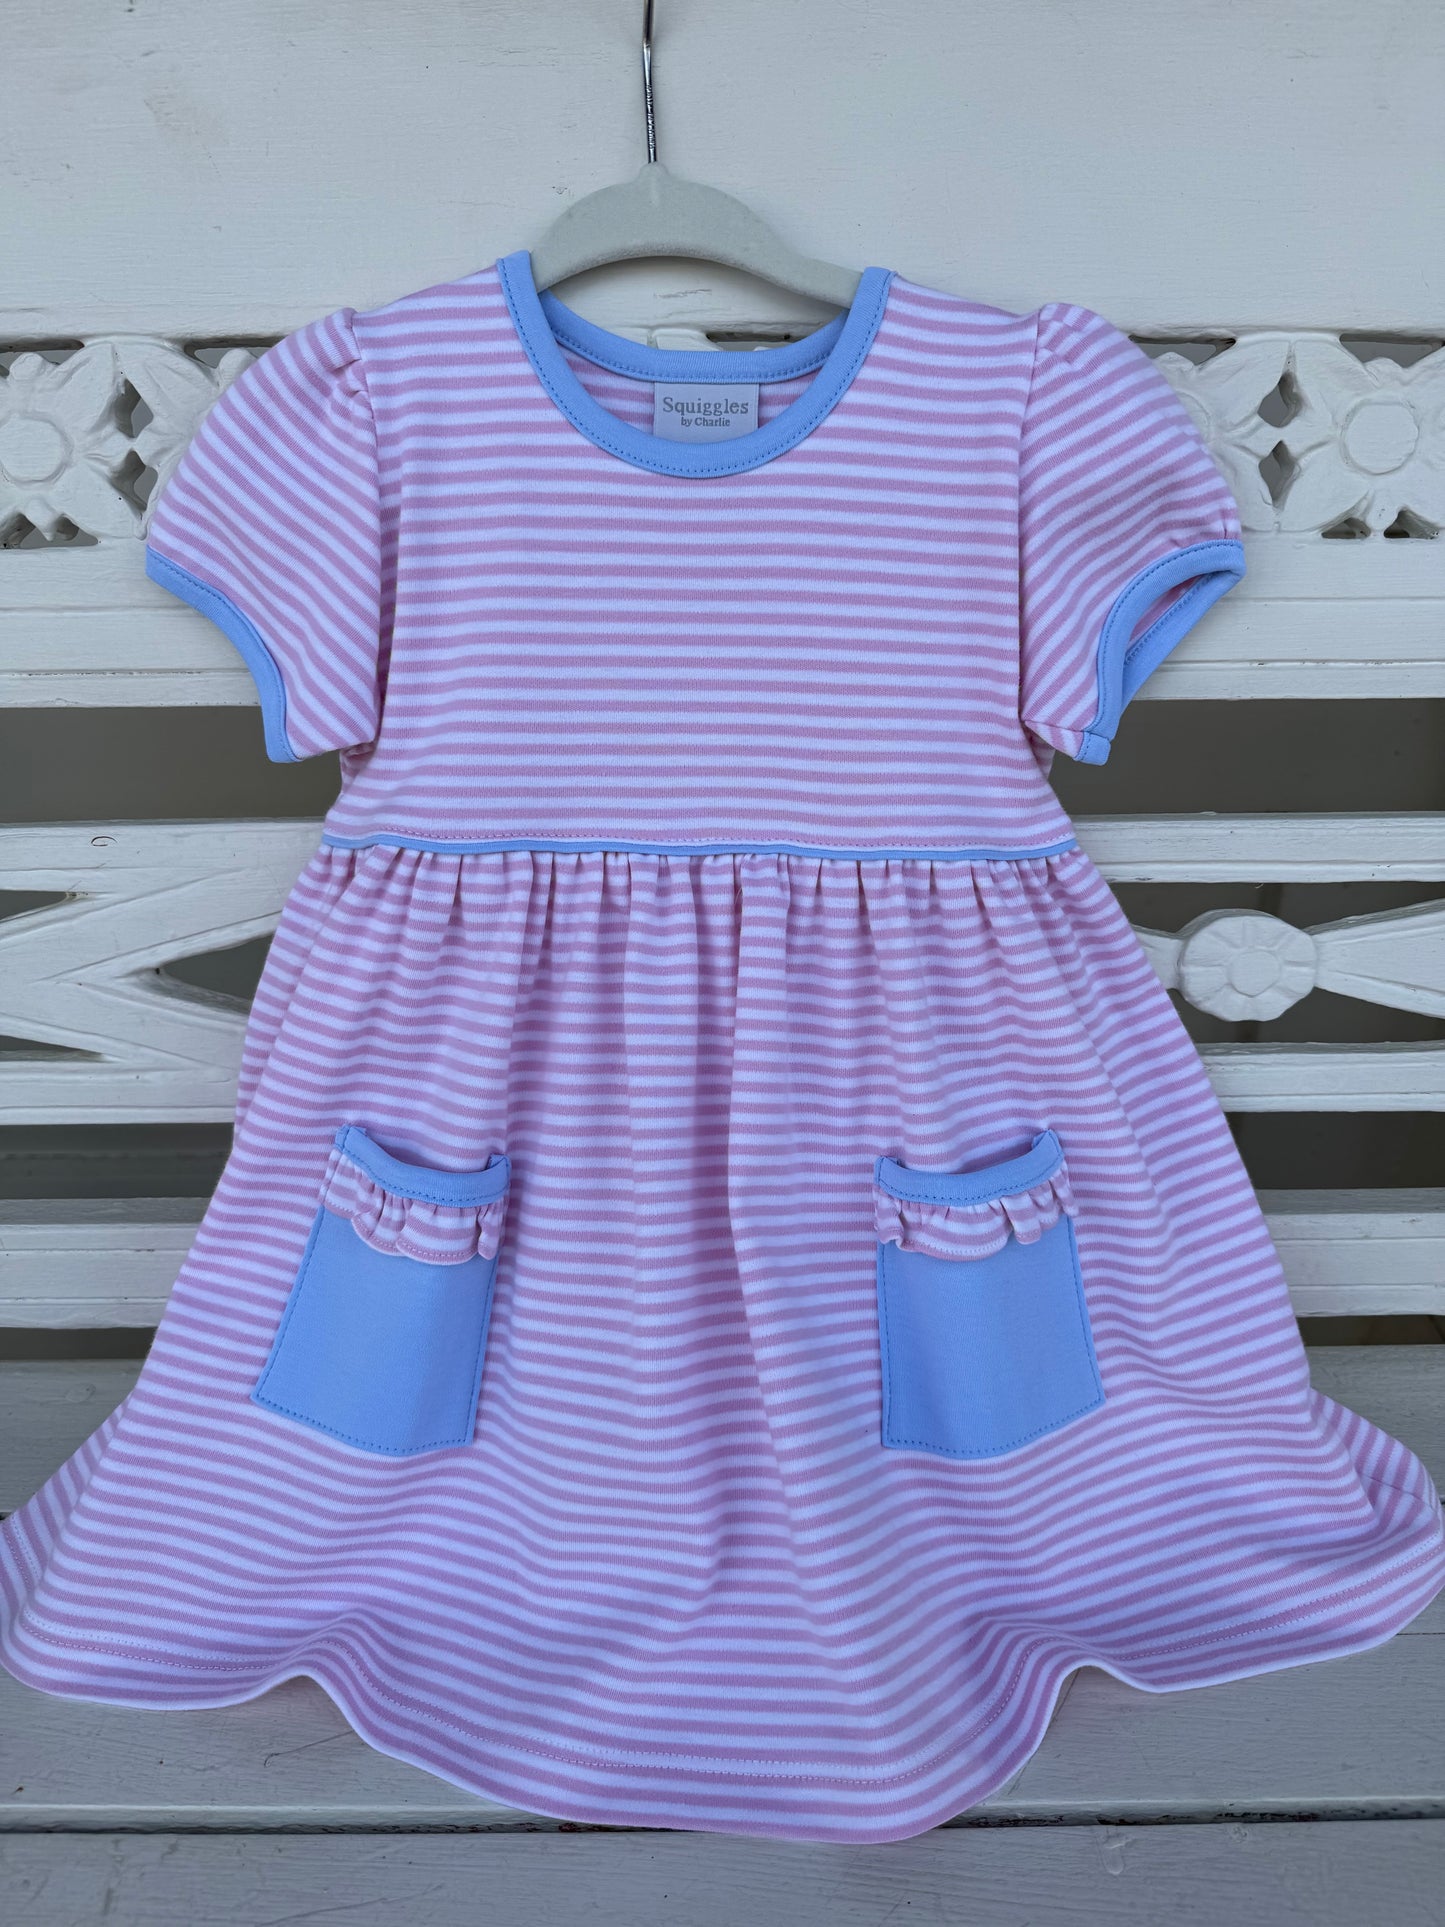 Squiggles Popover Dress with Pockets